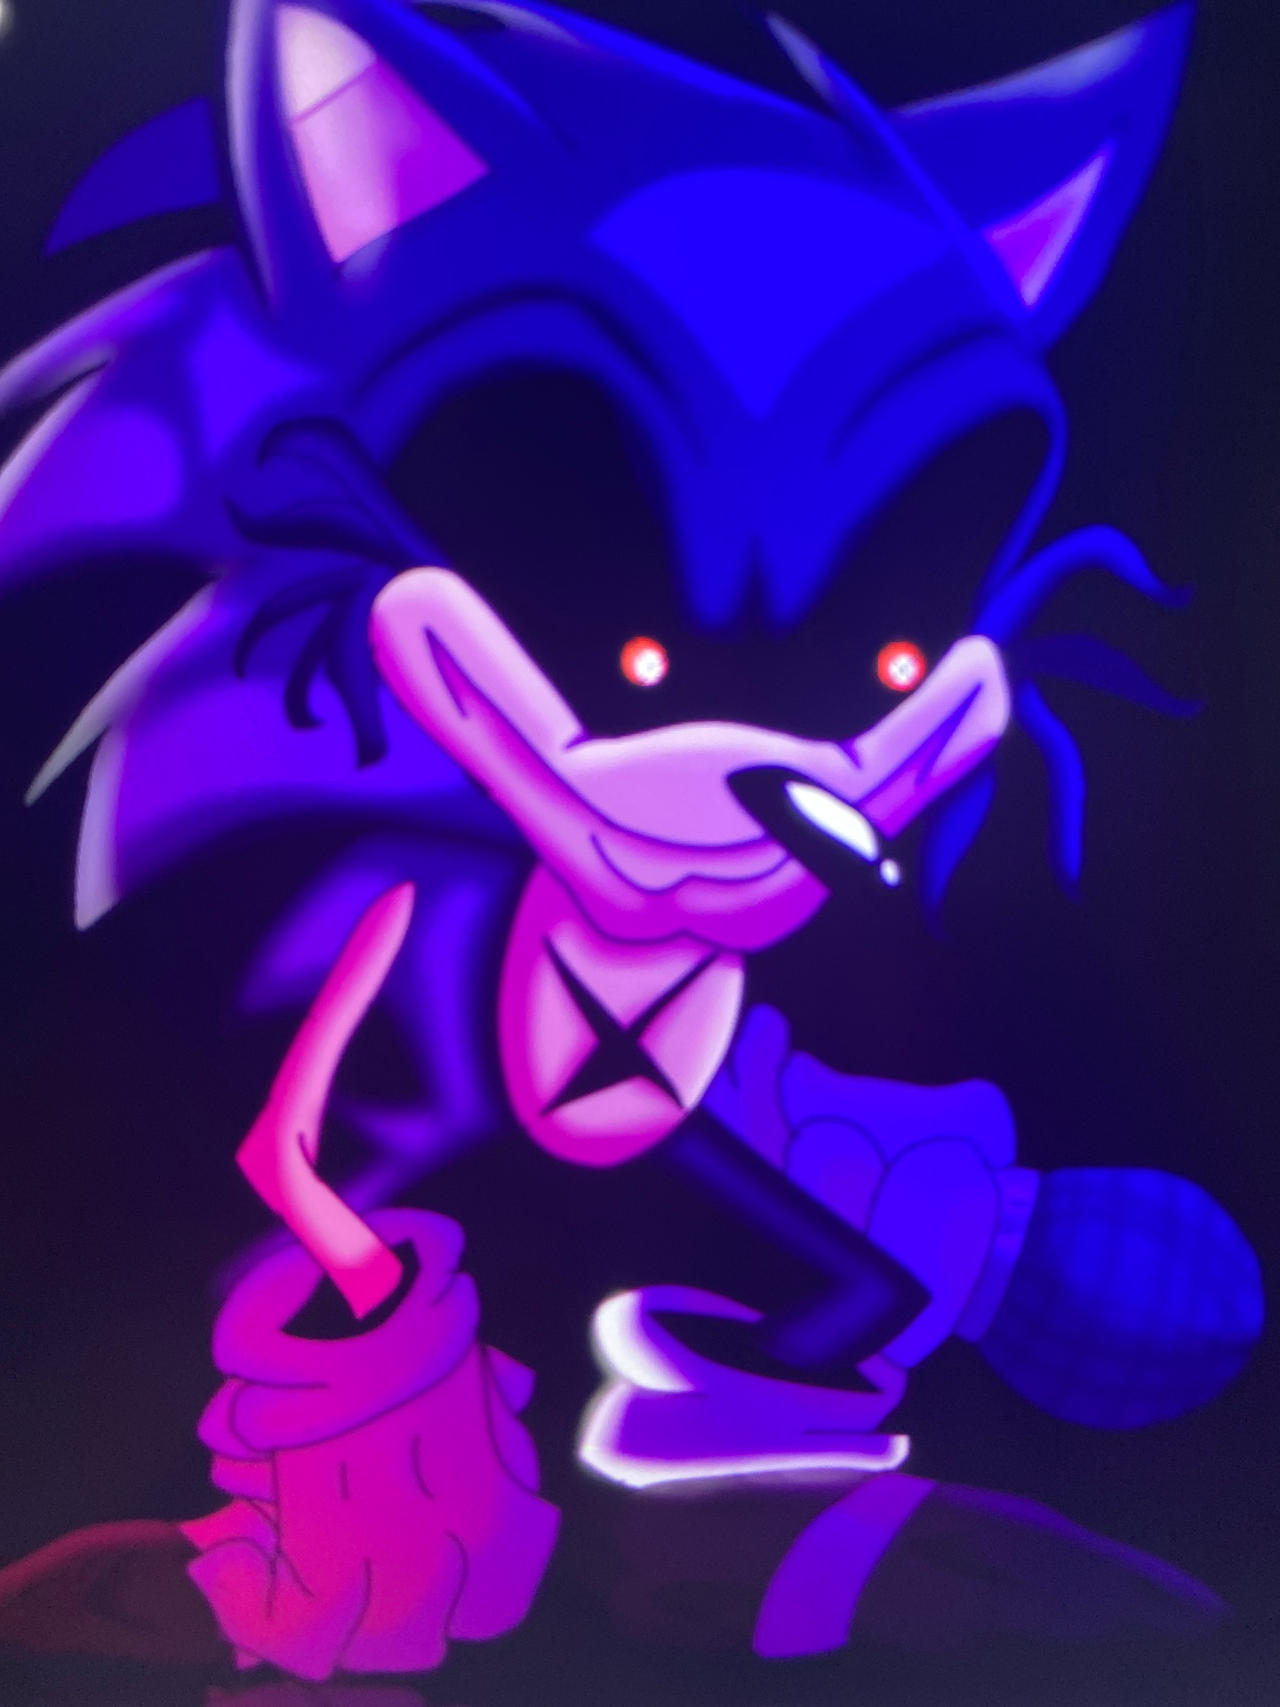 Lord X x Sonic.EXE by GalacticPlanetGuy on DeviantArt